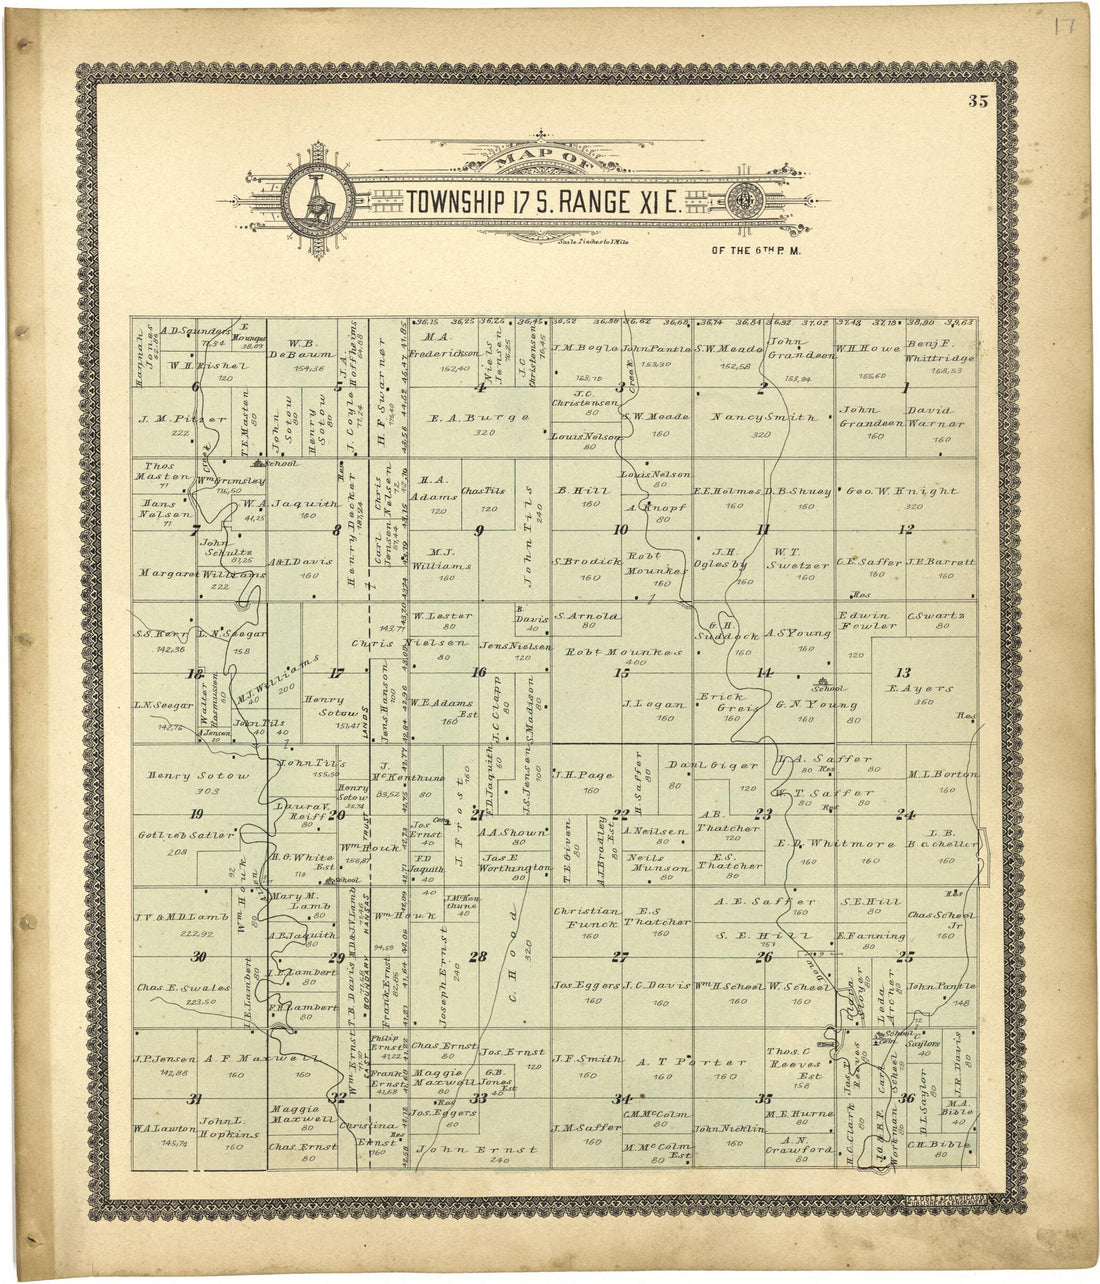 This old map of Map of Township 17 S. Range XI E. from Standard Atlas of Lyon County, Kansas from 1901 was created by  Geo. A. Ogle &amp; Co in 1901